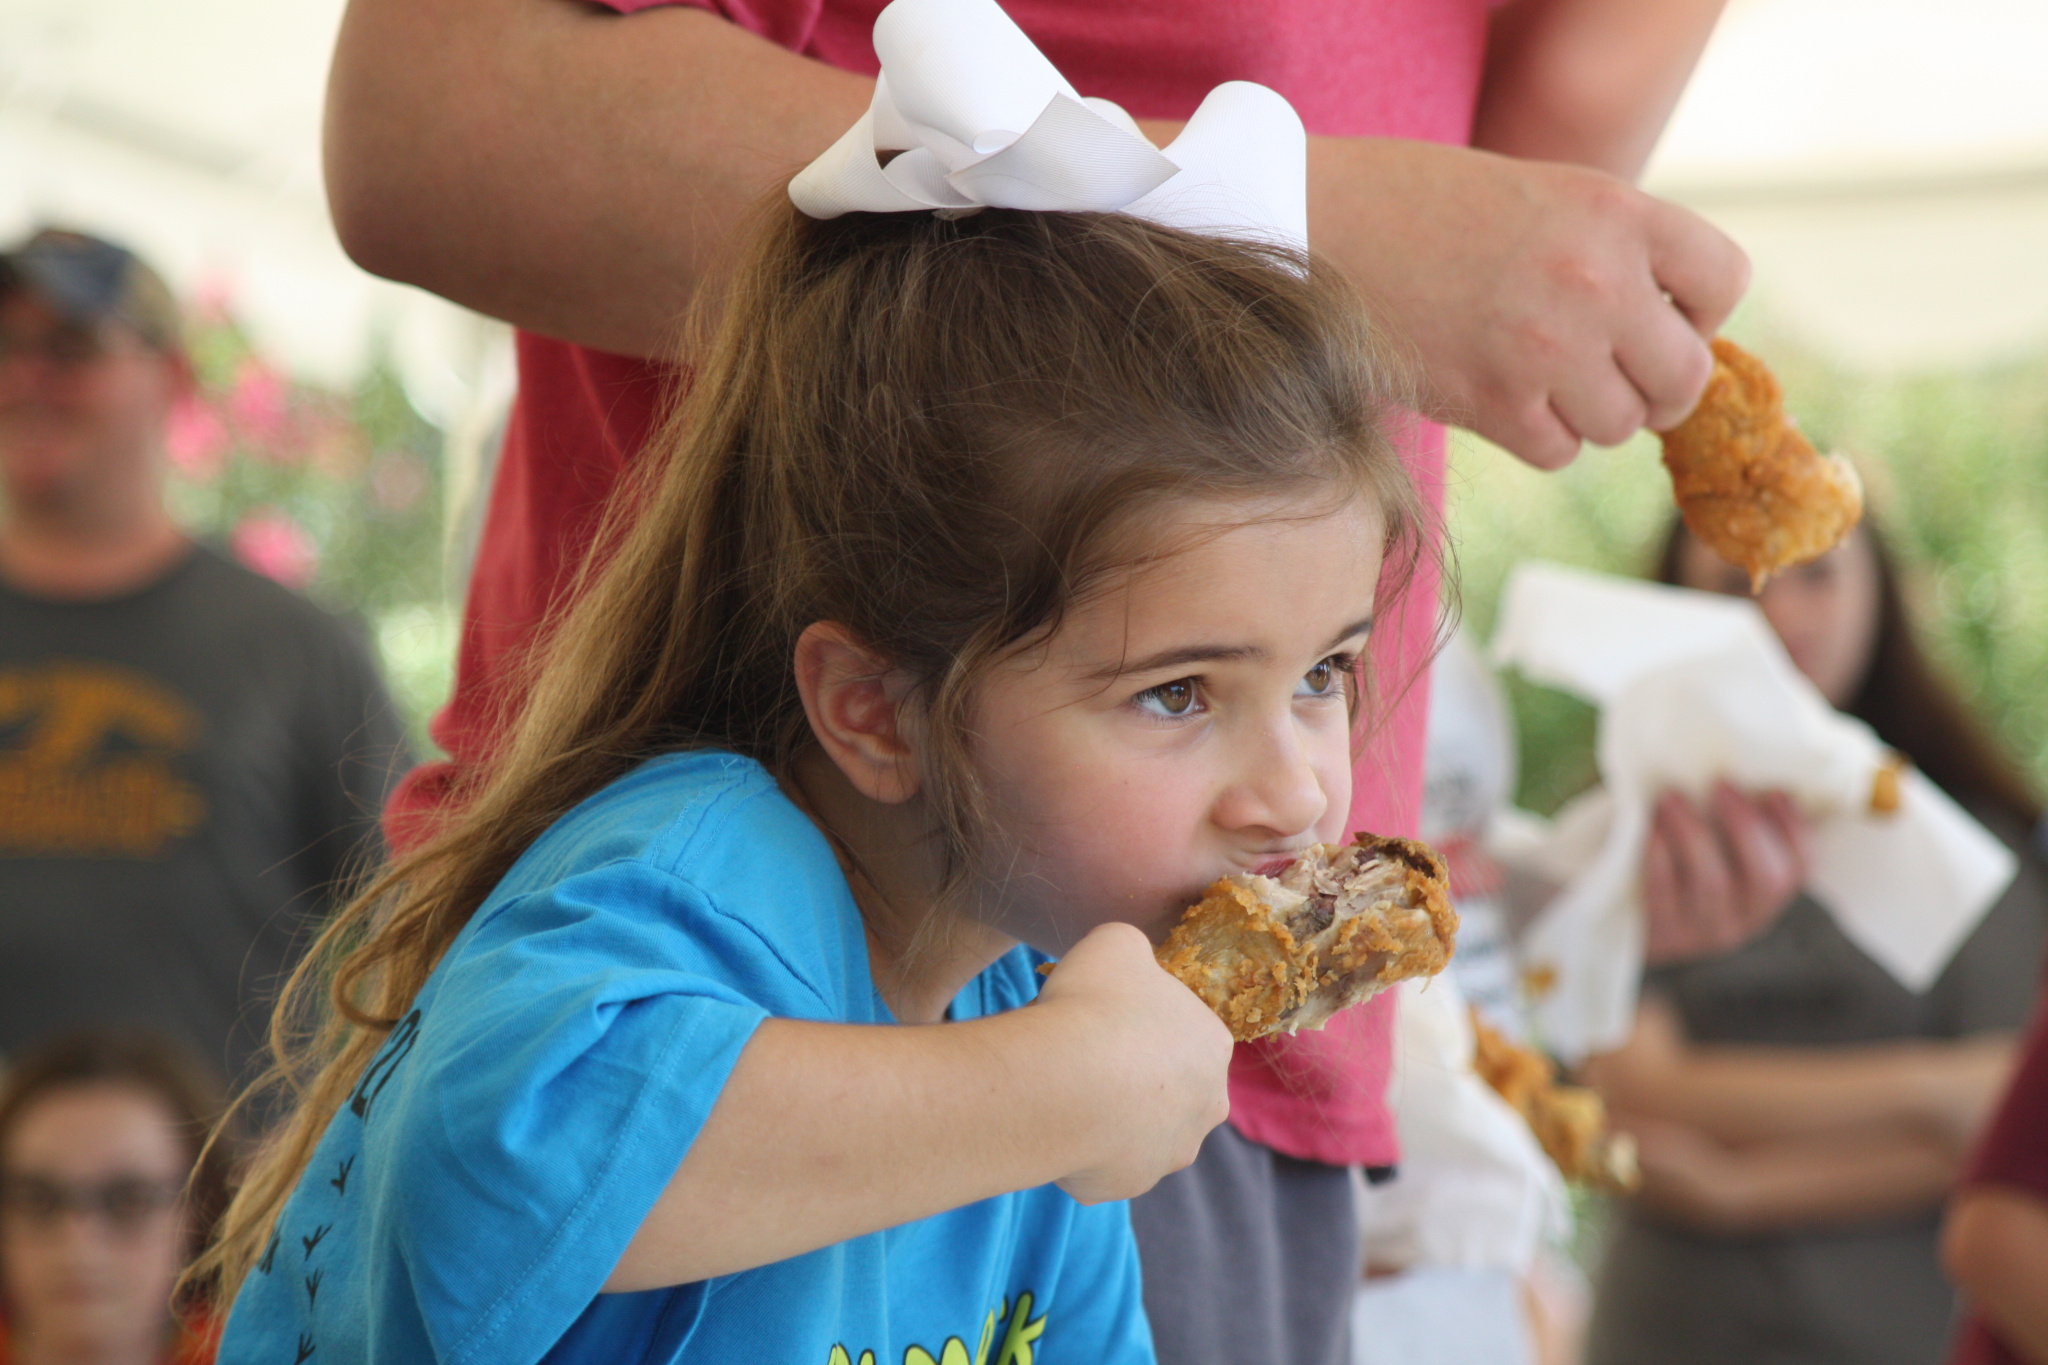 Olivia Williams, 6, in the drumstick eating contest